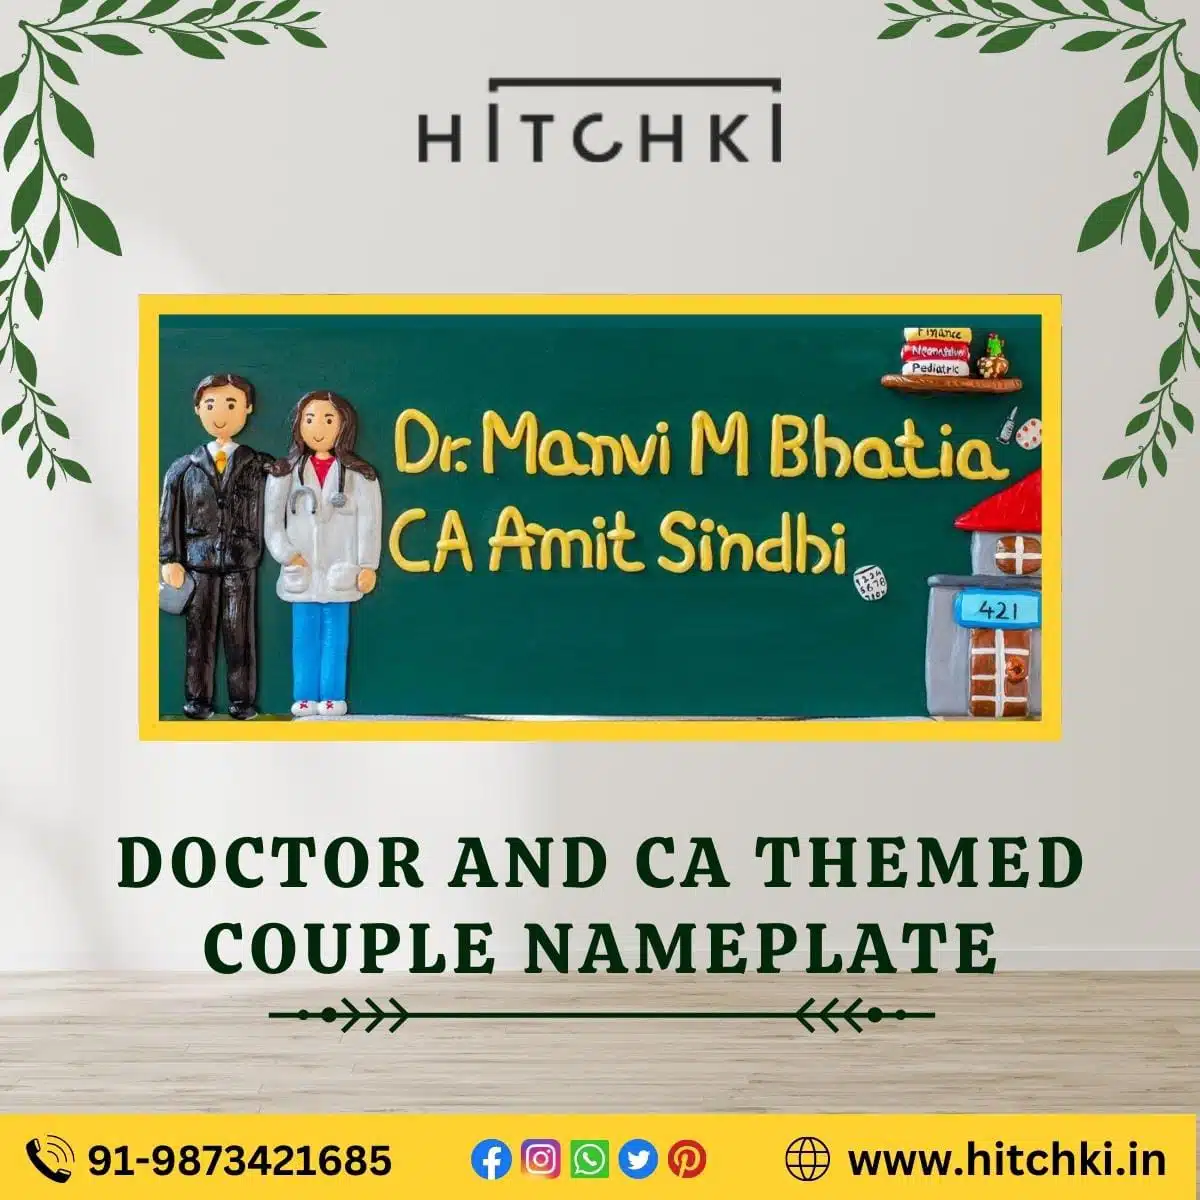 New Couple Name Plate From Hitchki Online